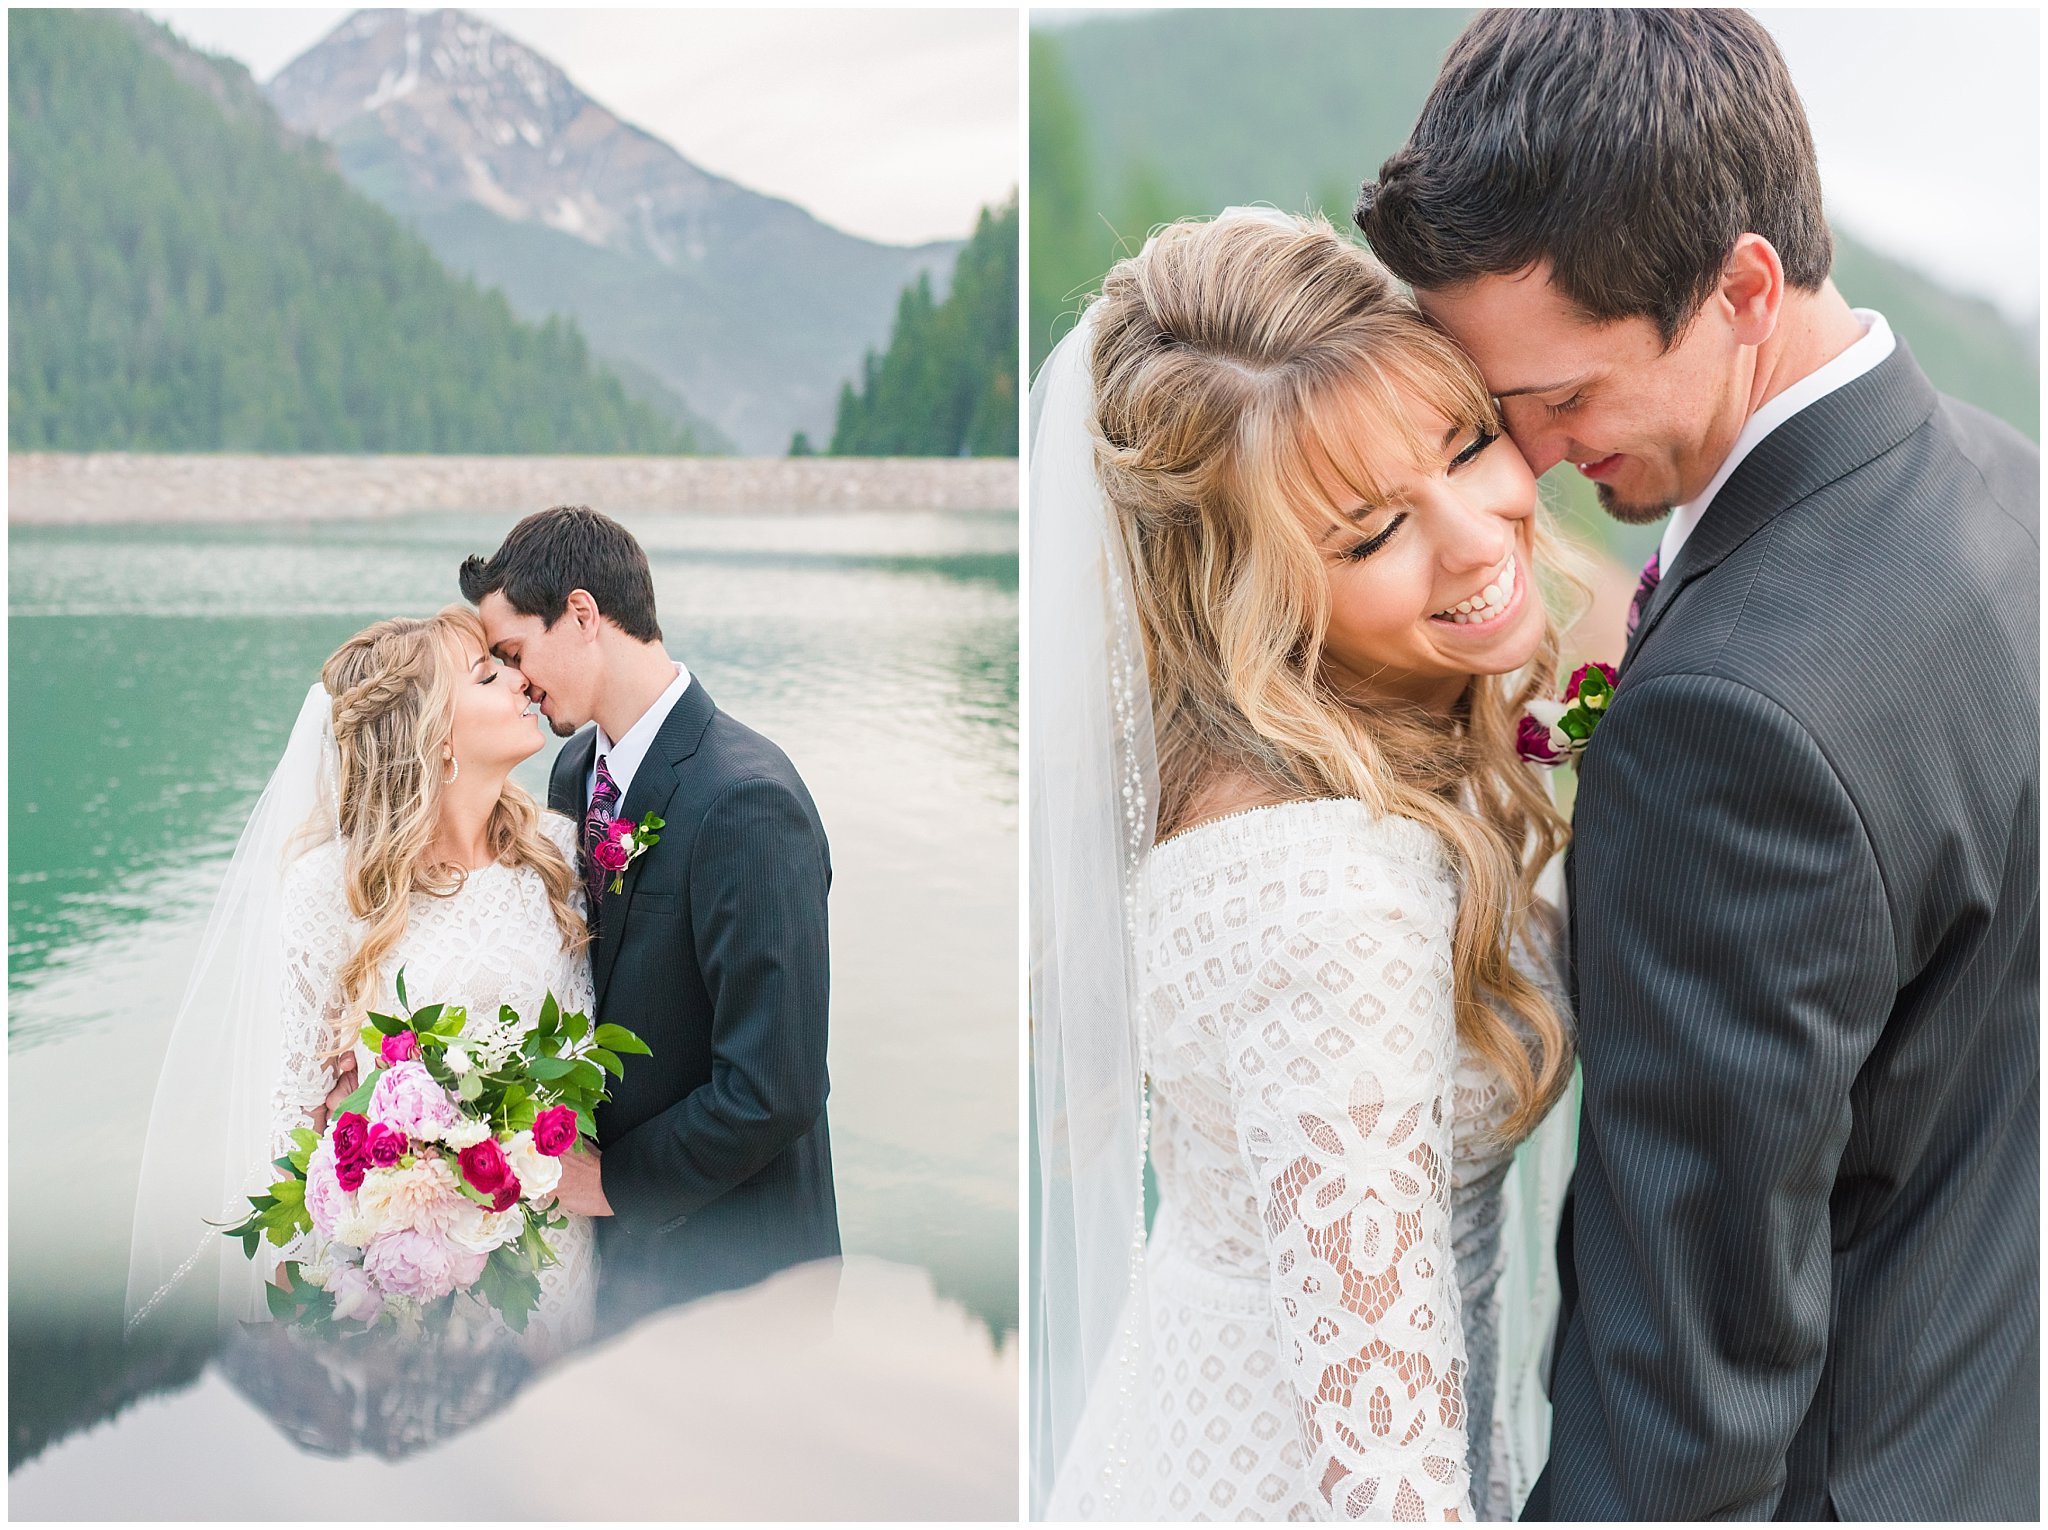 Candid photos of bride in lace dress and groom in black suit with deep pink and white floral bouquet | Utah Mountains and reservoir water Wedding Formal Session | Tibble Fork Summer Formal Session | Jessie and Dallin Photography